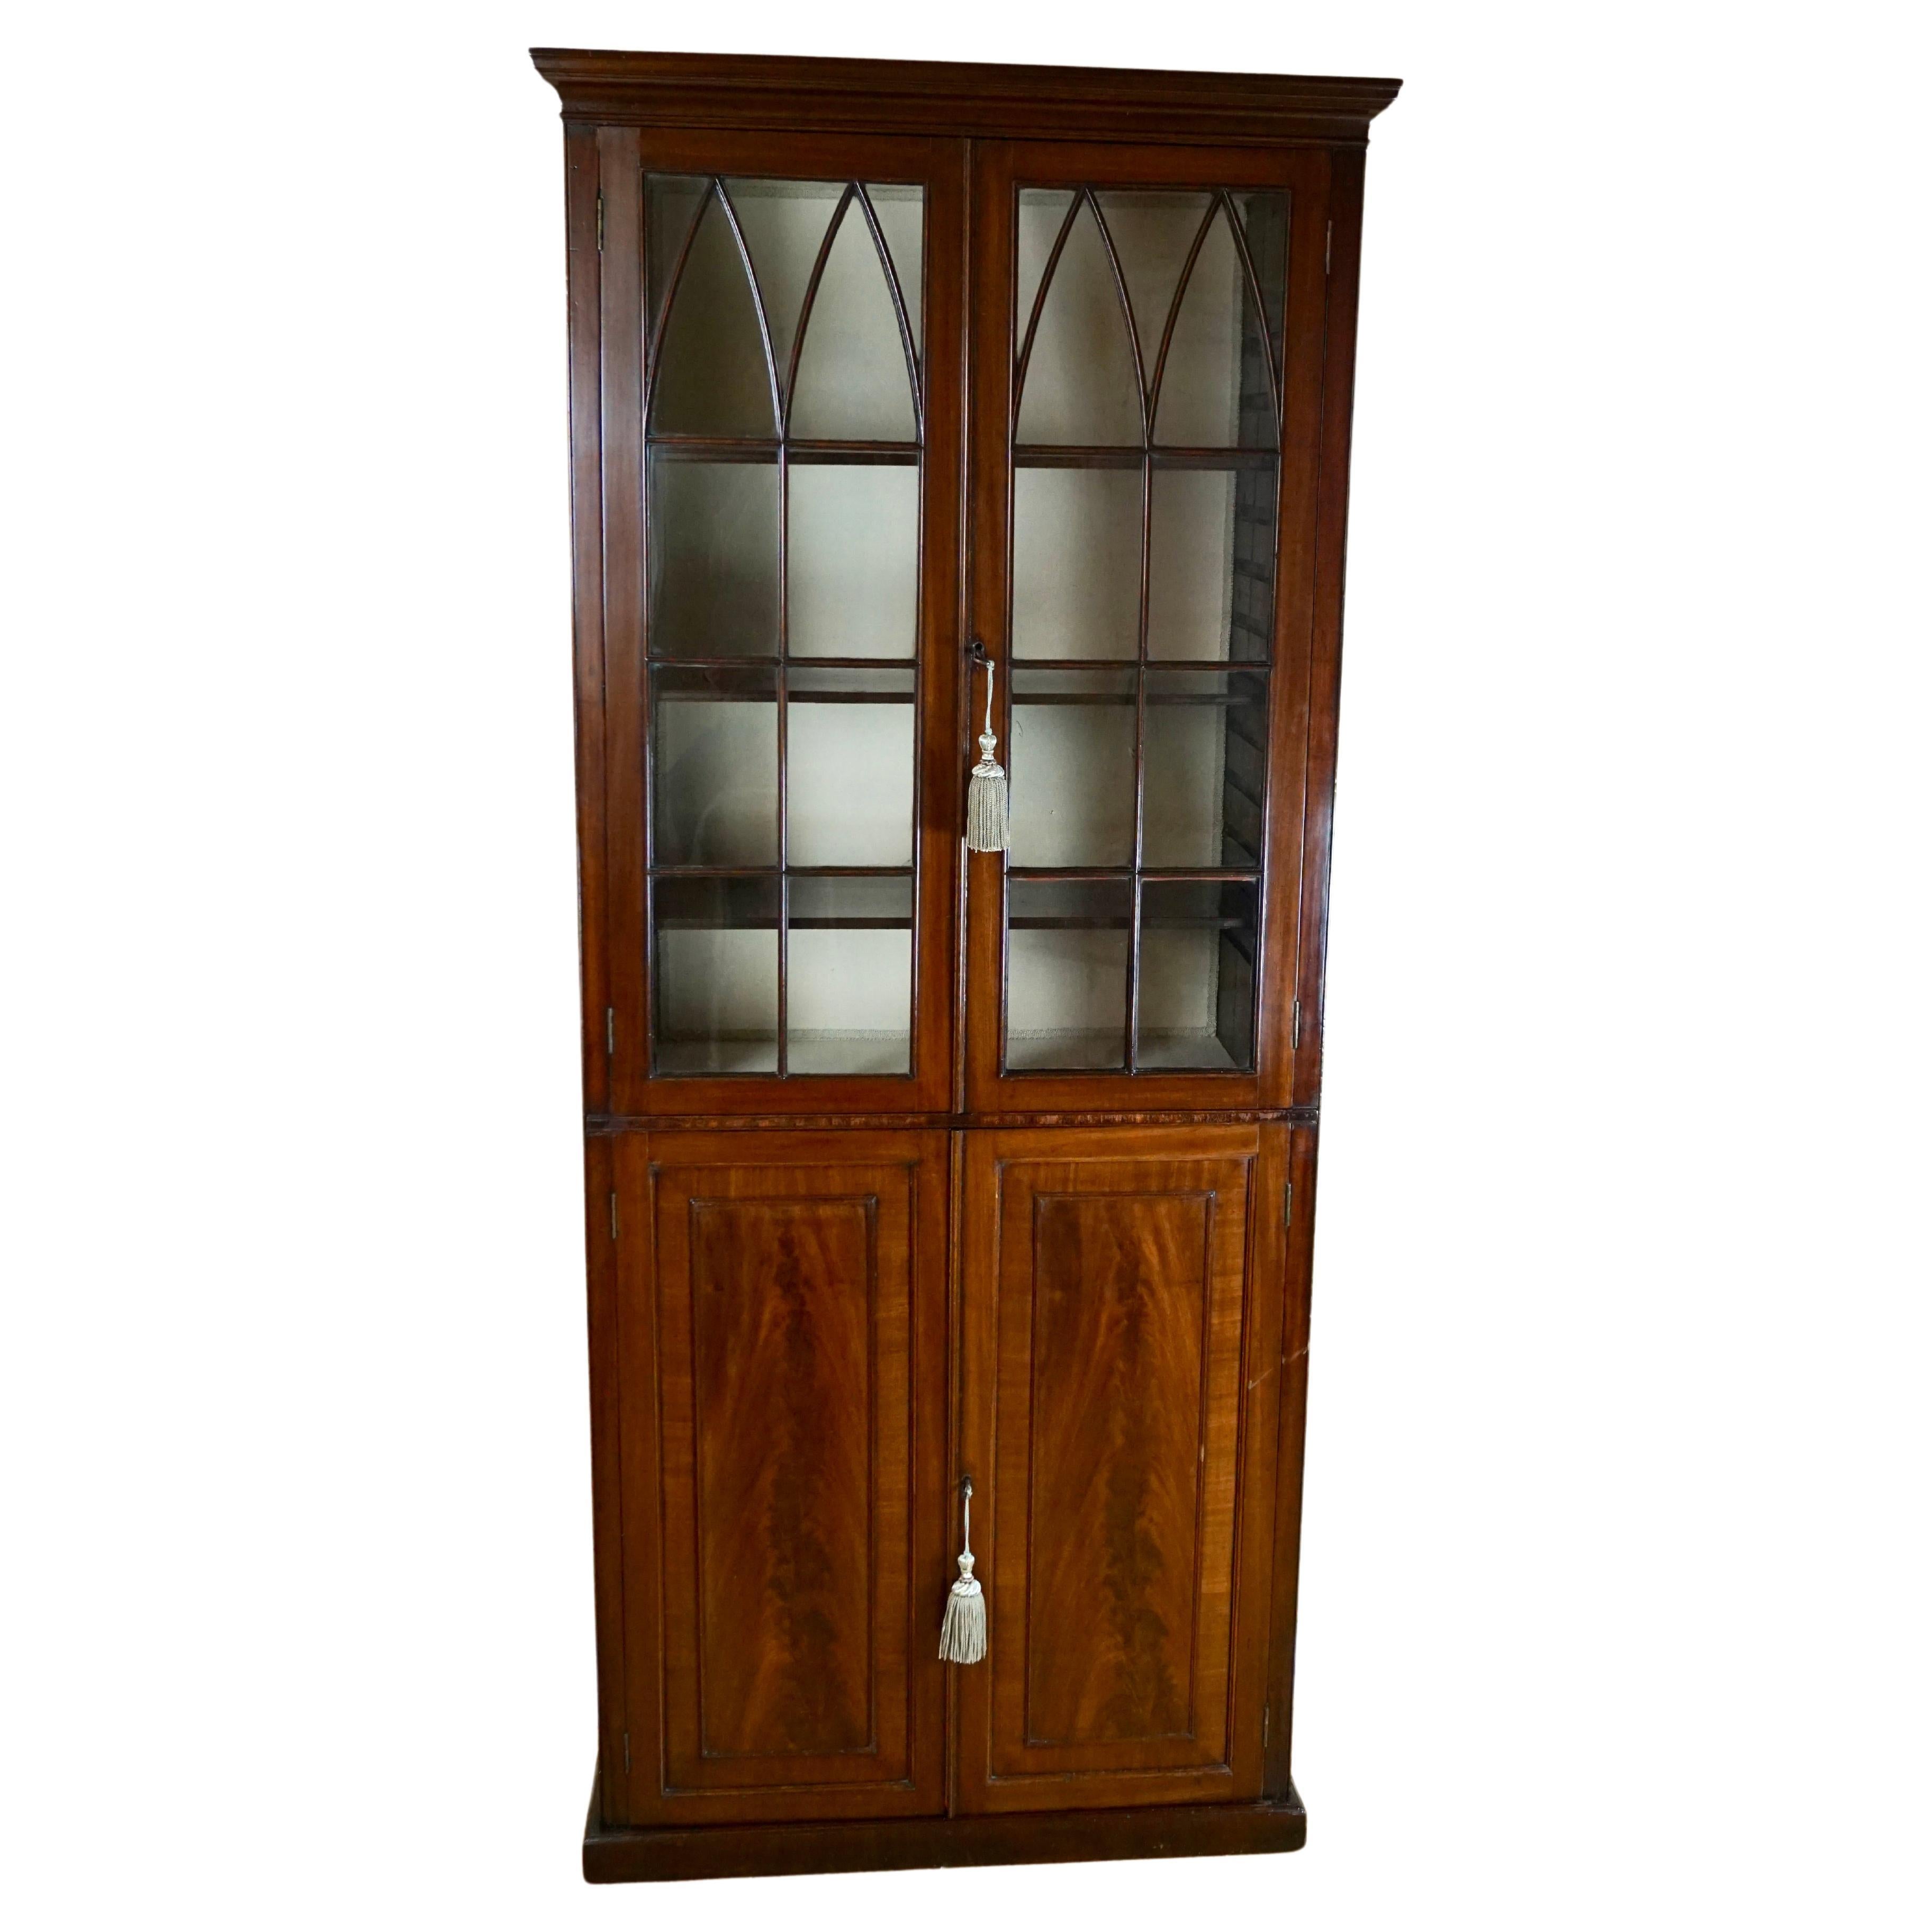 An English mahogany one piece bookcase, the molded crown above double astragal glazed doors with adjustable shelves over a pair of crotch mahogany panelled doors. The whole rests on a plinth base. Circa 1770-1800. Restored.